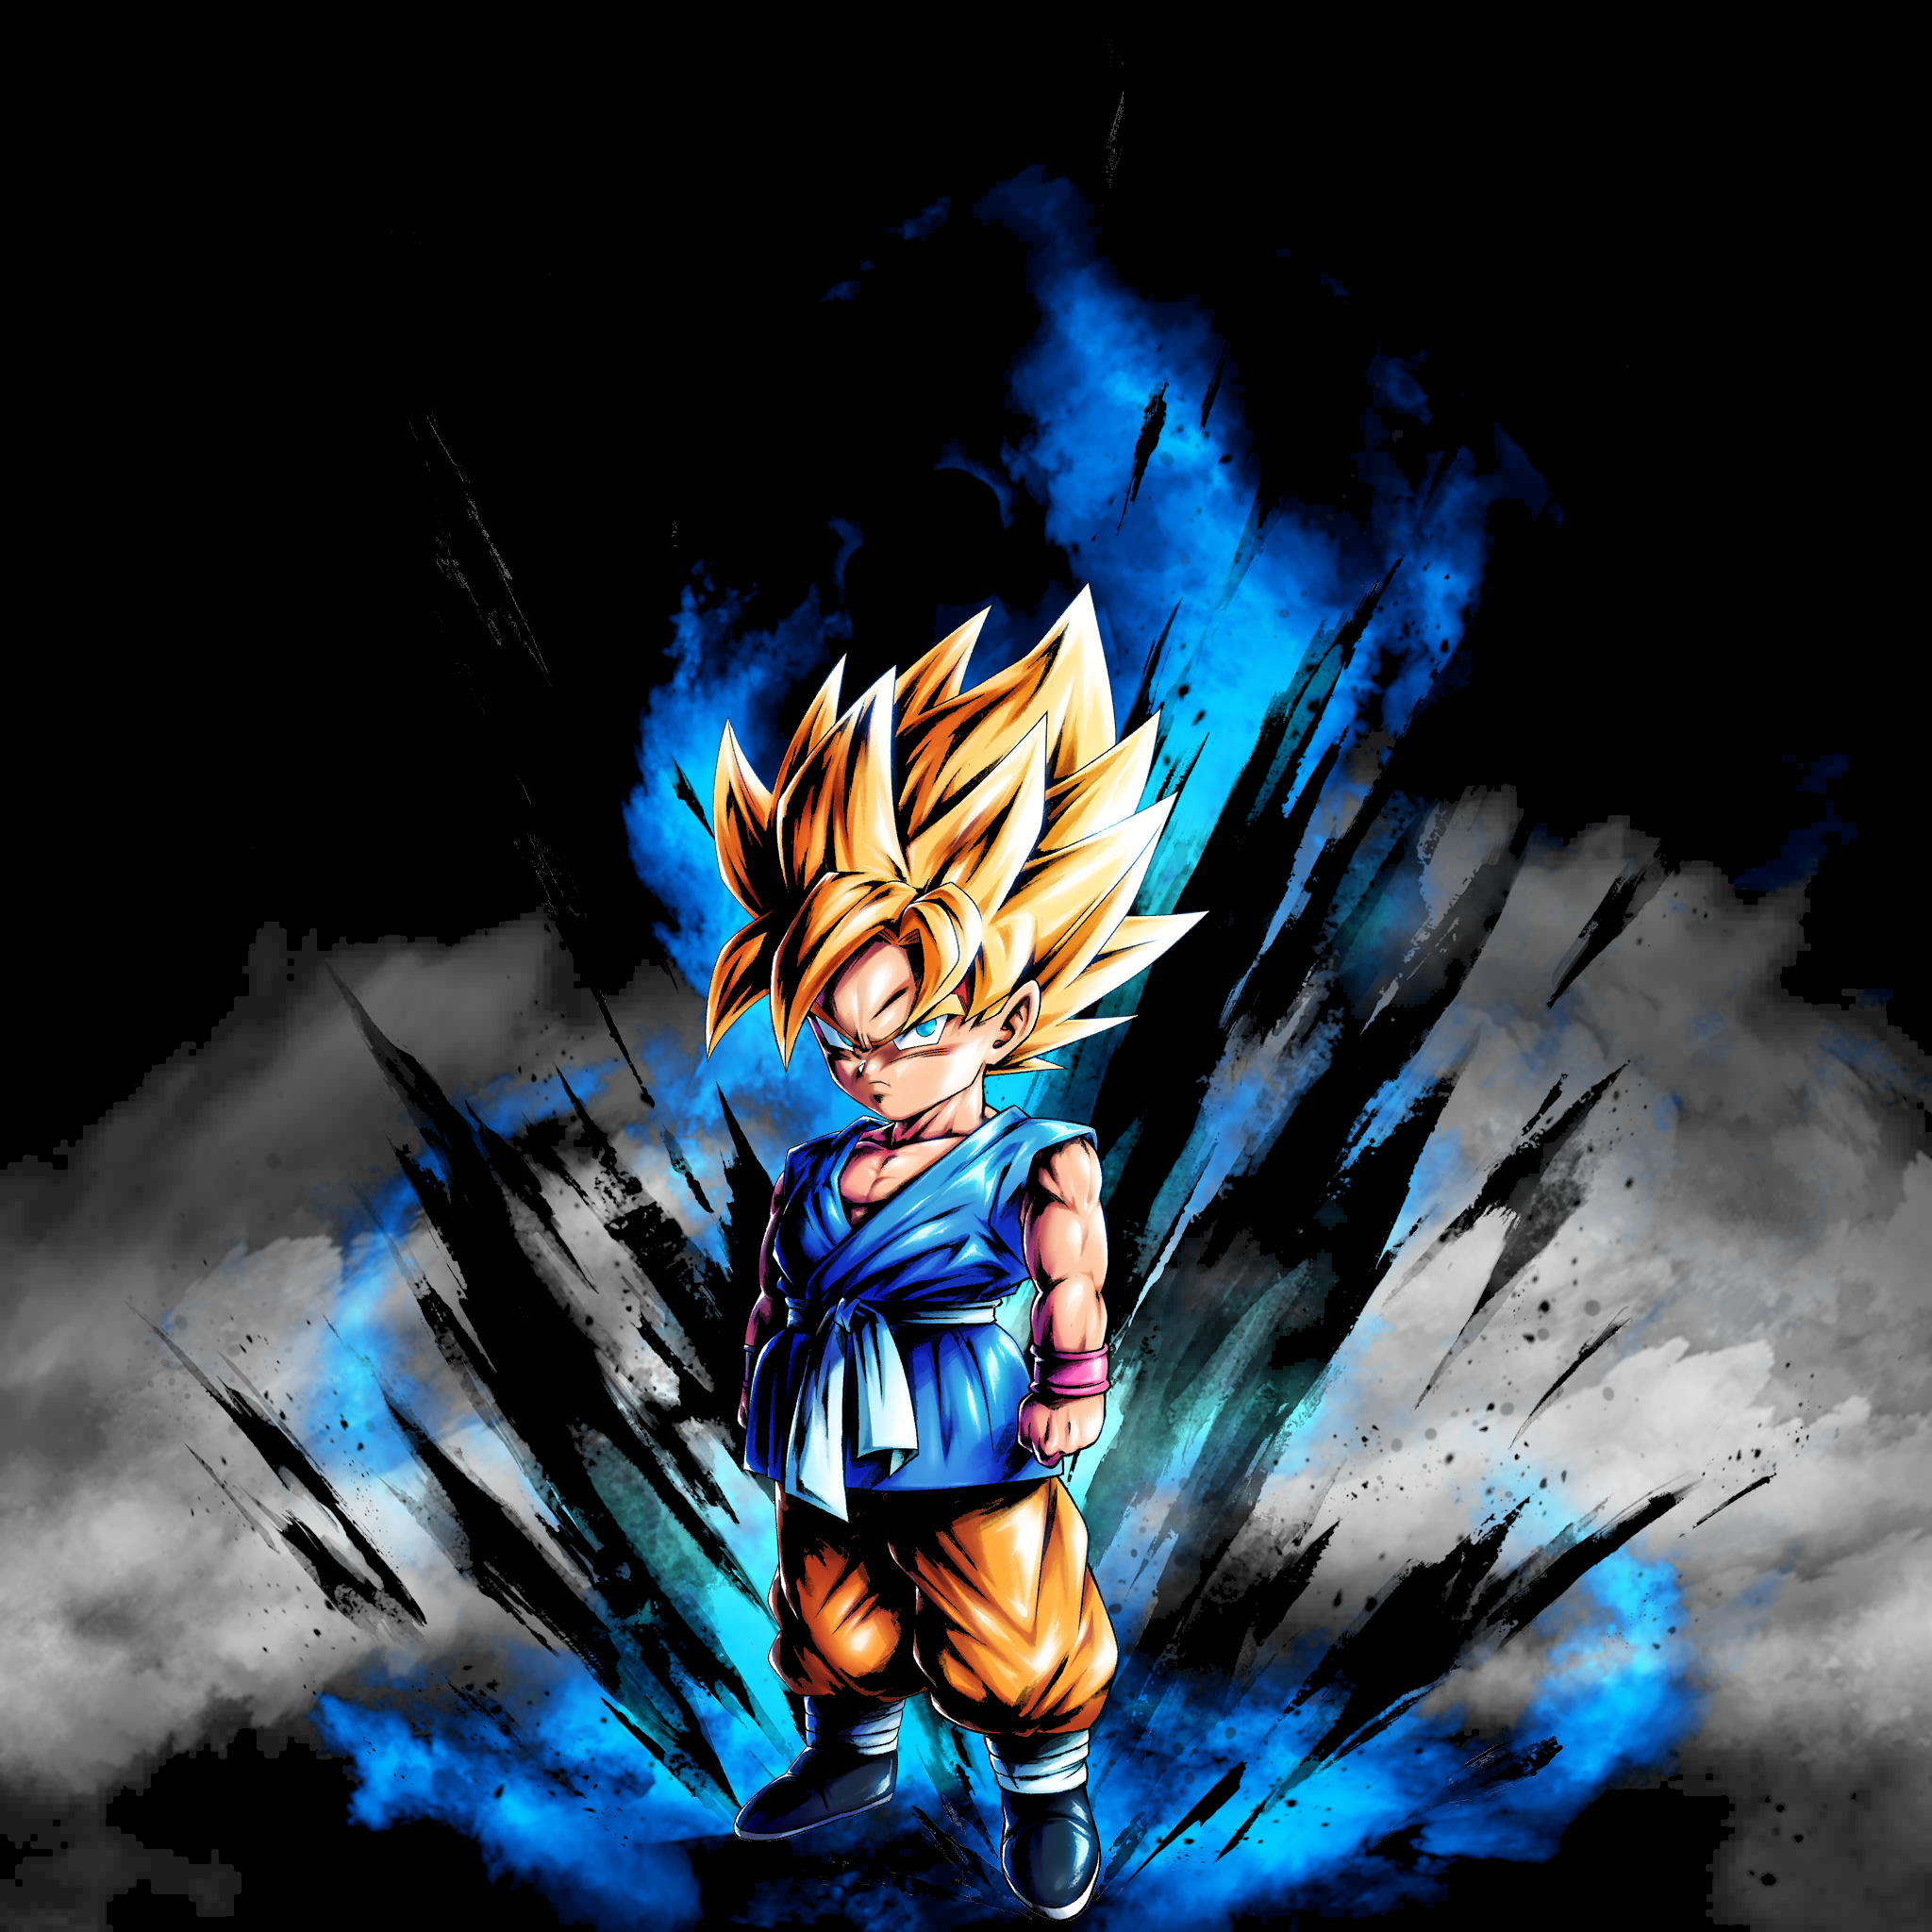 Super Saiyan Goku 50.54% True Black Amoled Wallpaper (Other UST Characters in the comments)